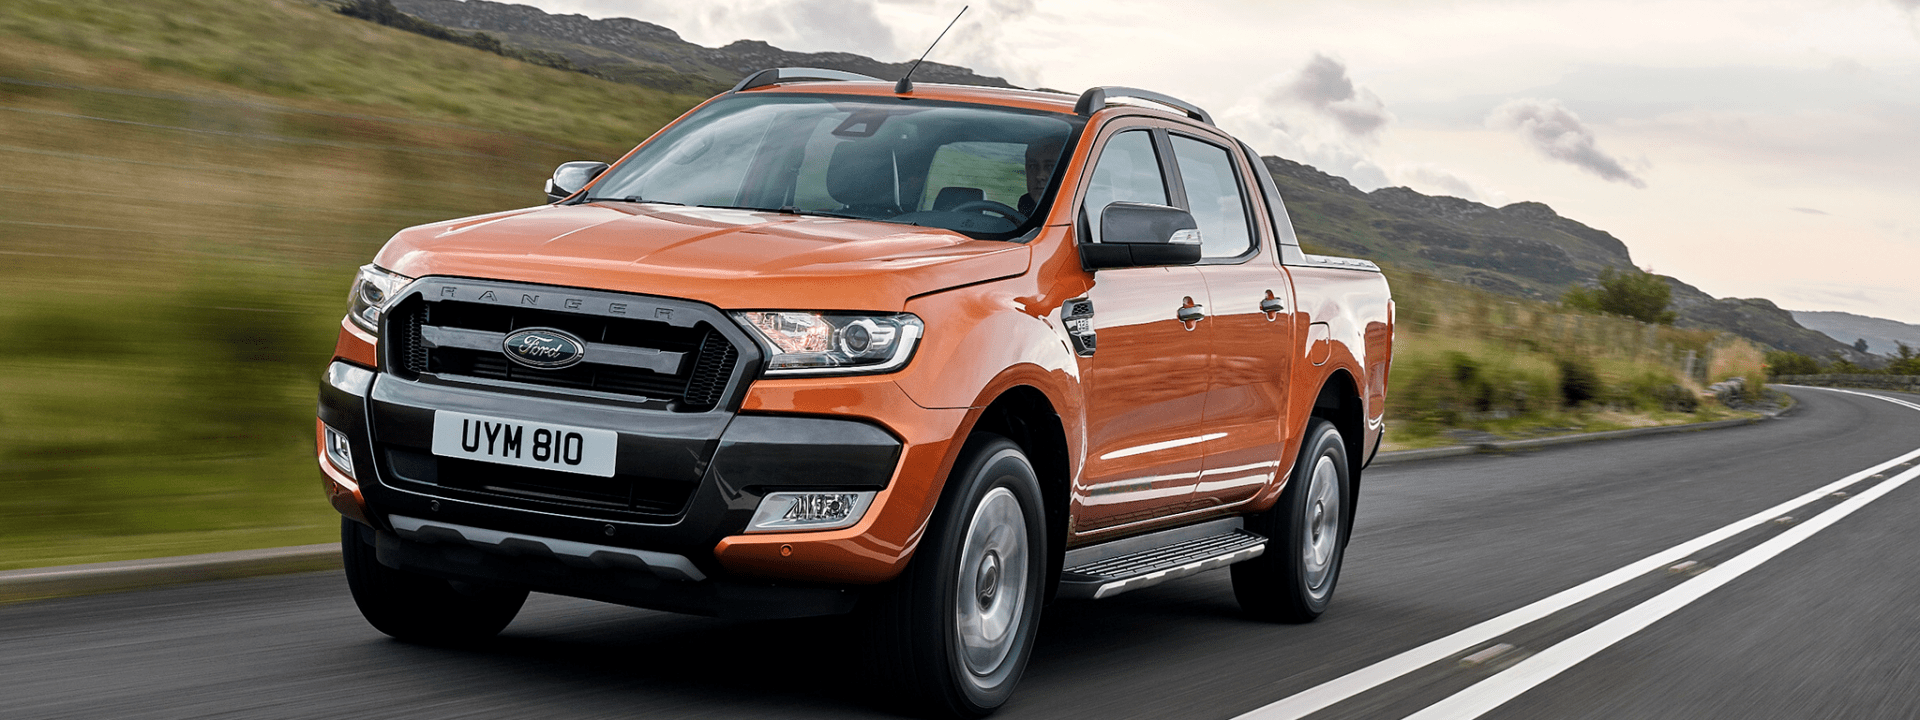 Photo: Ford Ranger driving on the road